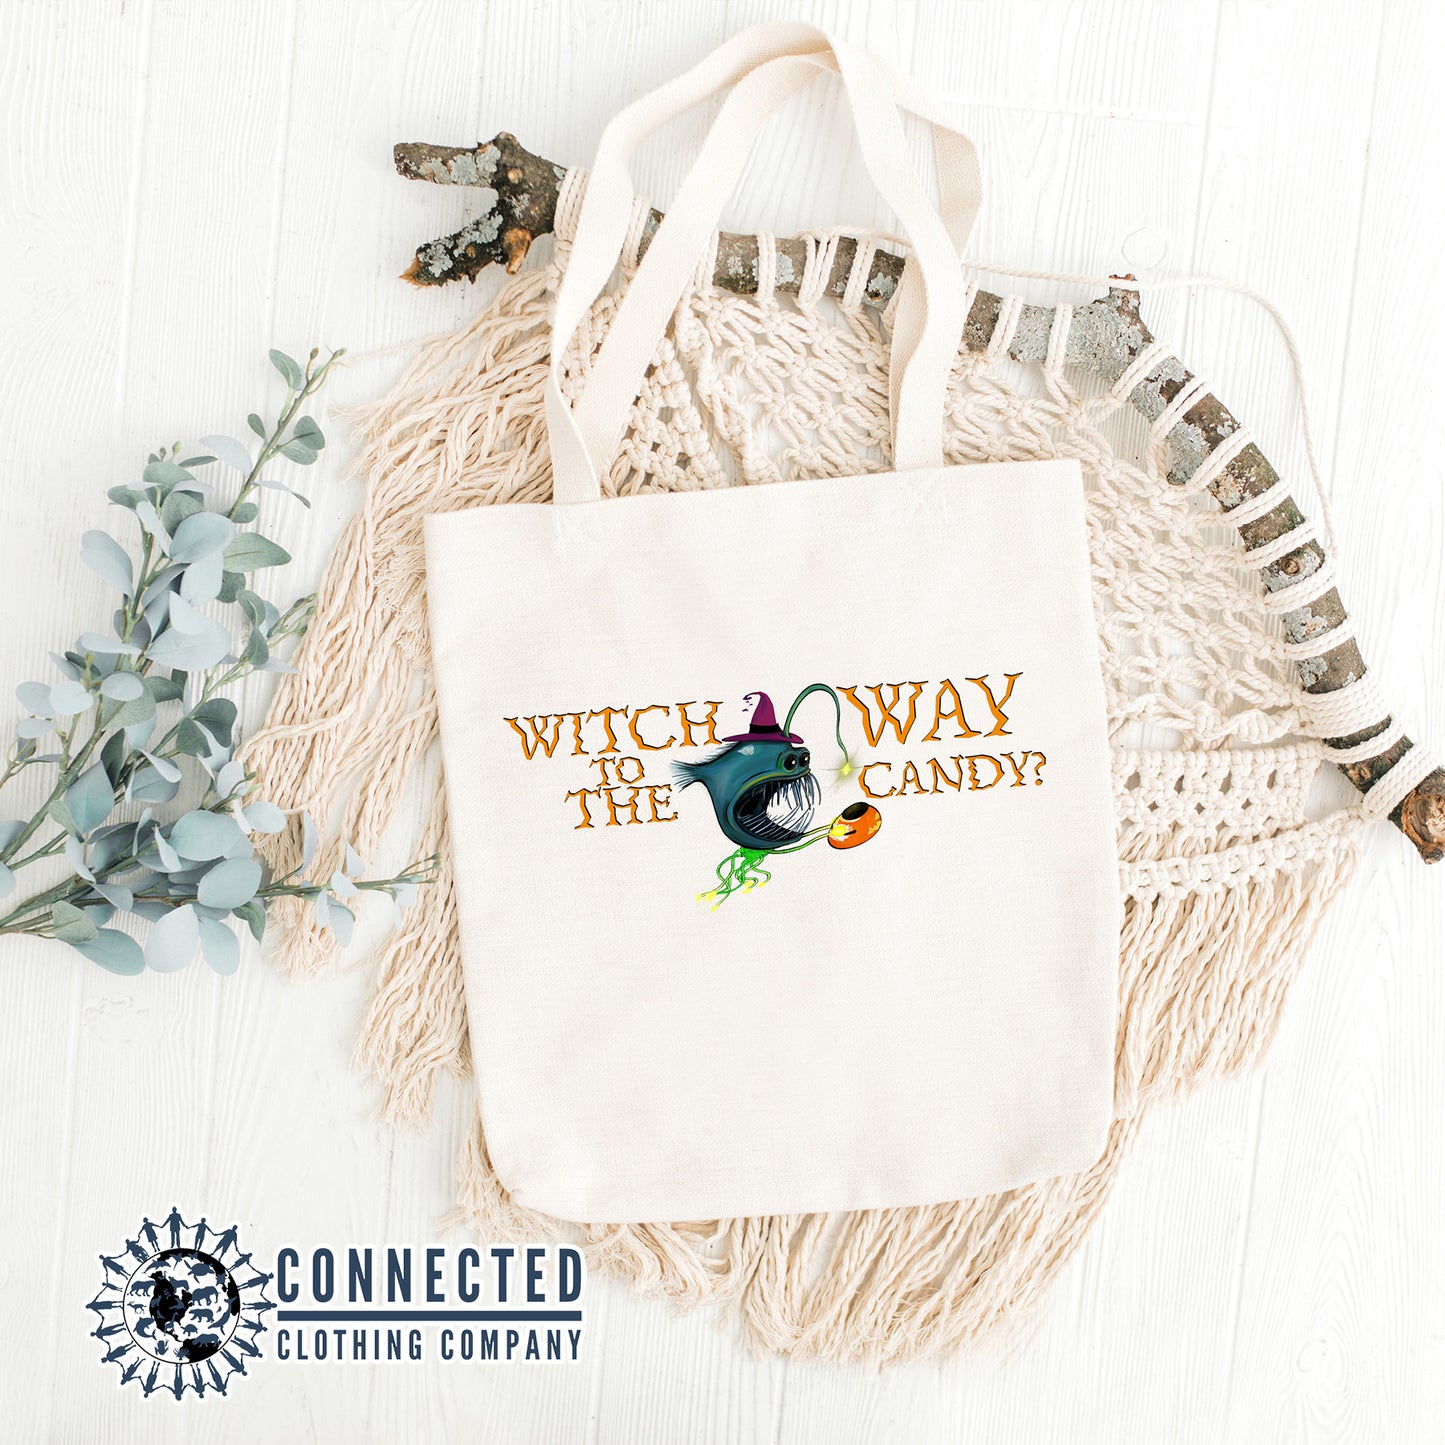 Witch Way To The Candy Anglerfish Tote Bag - Connected Clothing Company - 10% of proceeds donated to ocean conservation